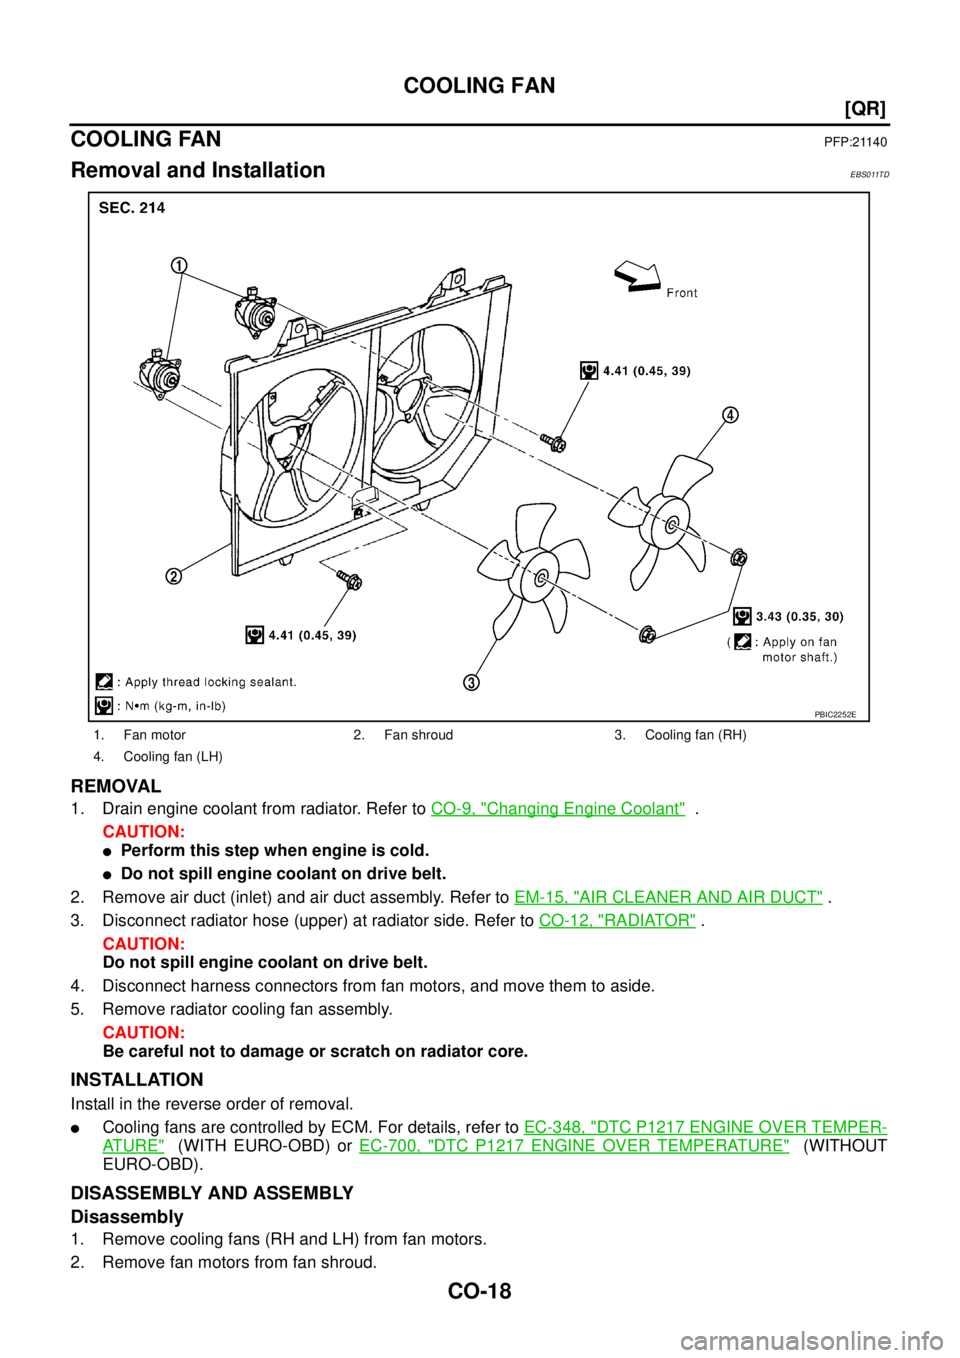 NISSAN X-TRAIL 2003  Service Owners Manual CO-18
[QR]
COOLING FAN
 
COOLING FANPFP:21140
Removal and InstallationEBS011TD
REMOVAL
1. Drain engine coolant from radiator. Refer to CO-9, "Changing Engine Coolant"  .
CAUTION:
Perform this step wh